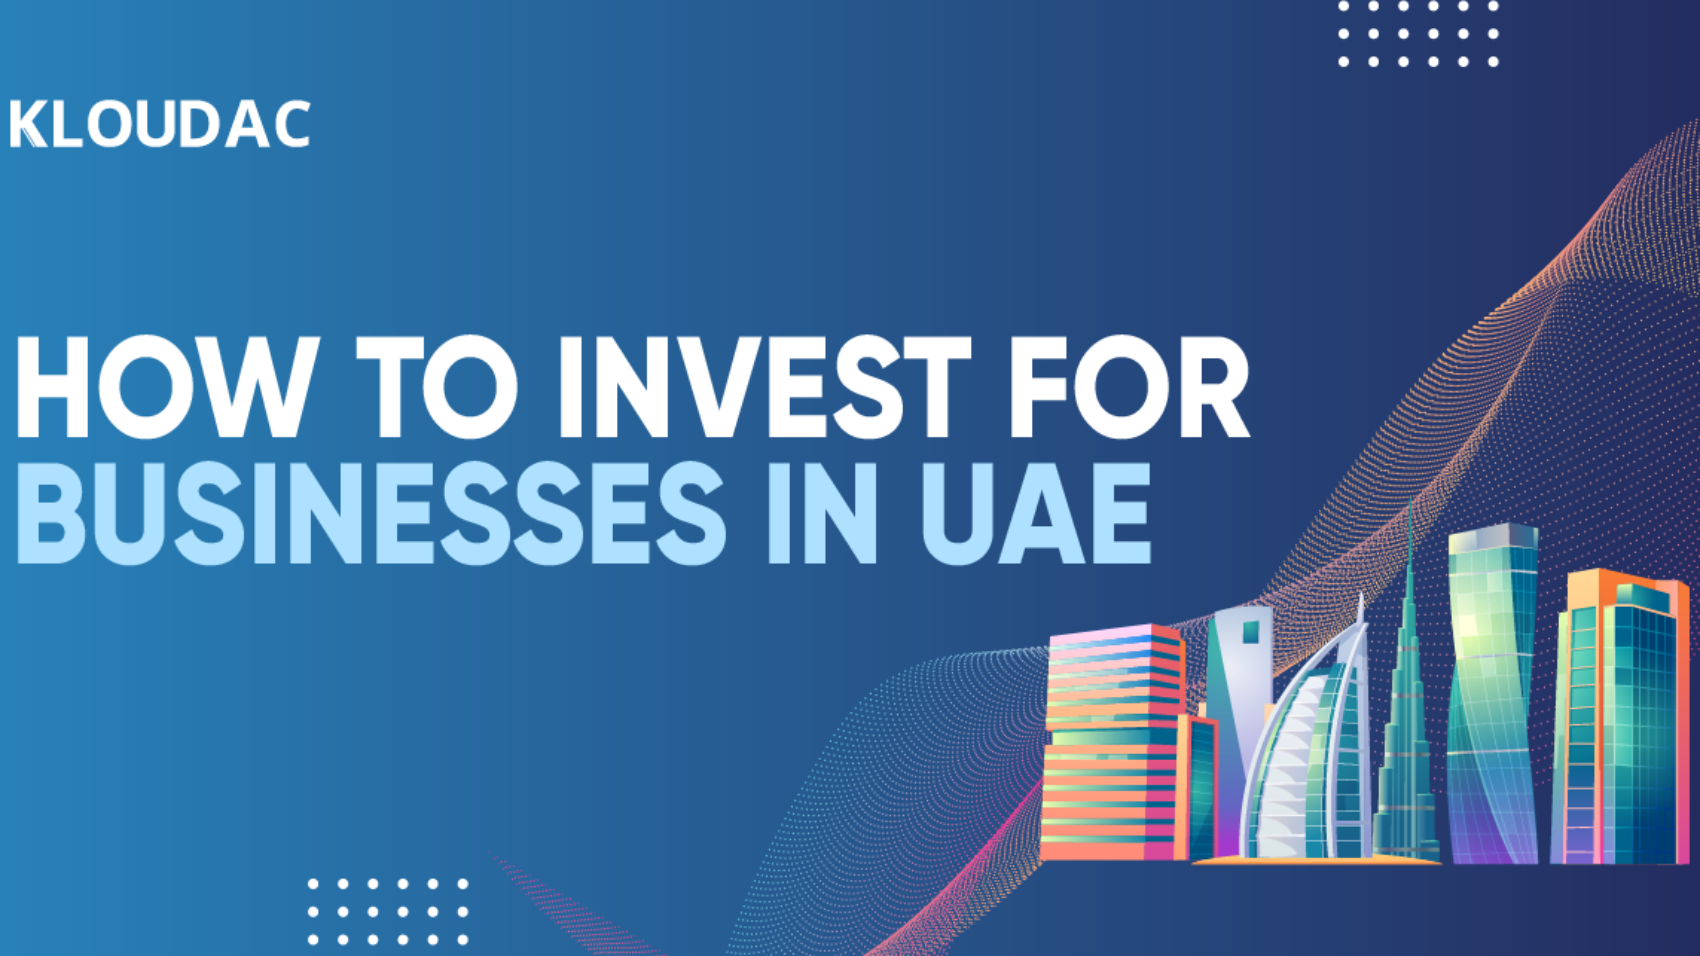 How to invest for businesses in UAE